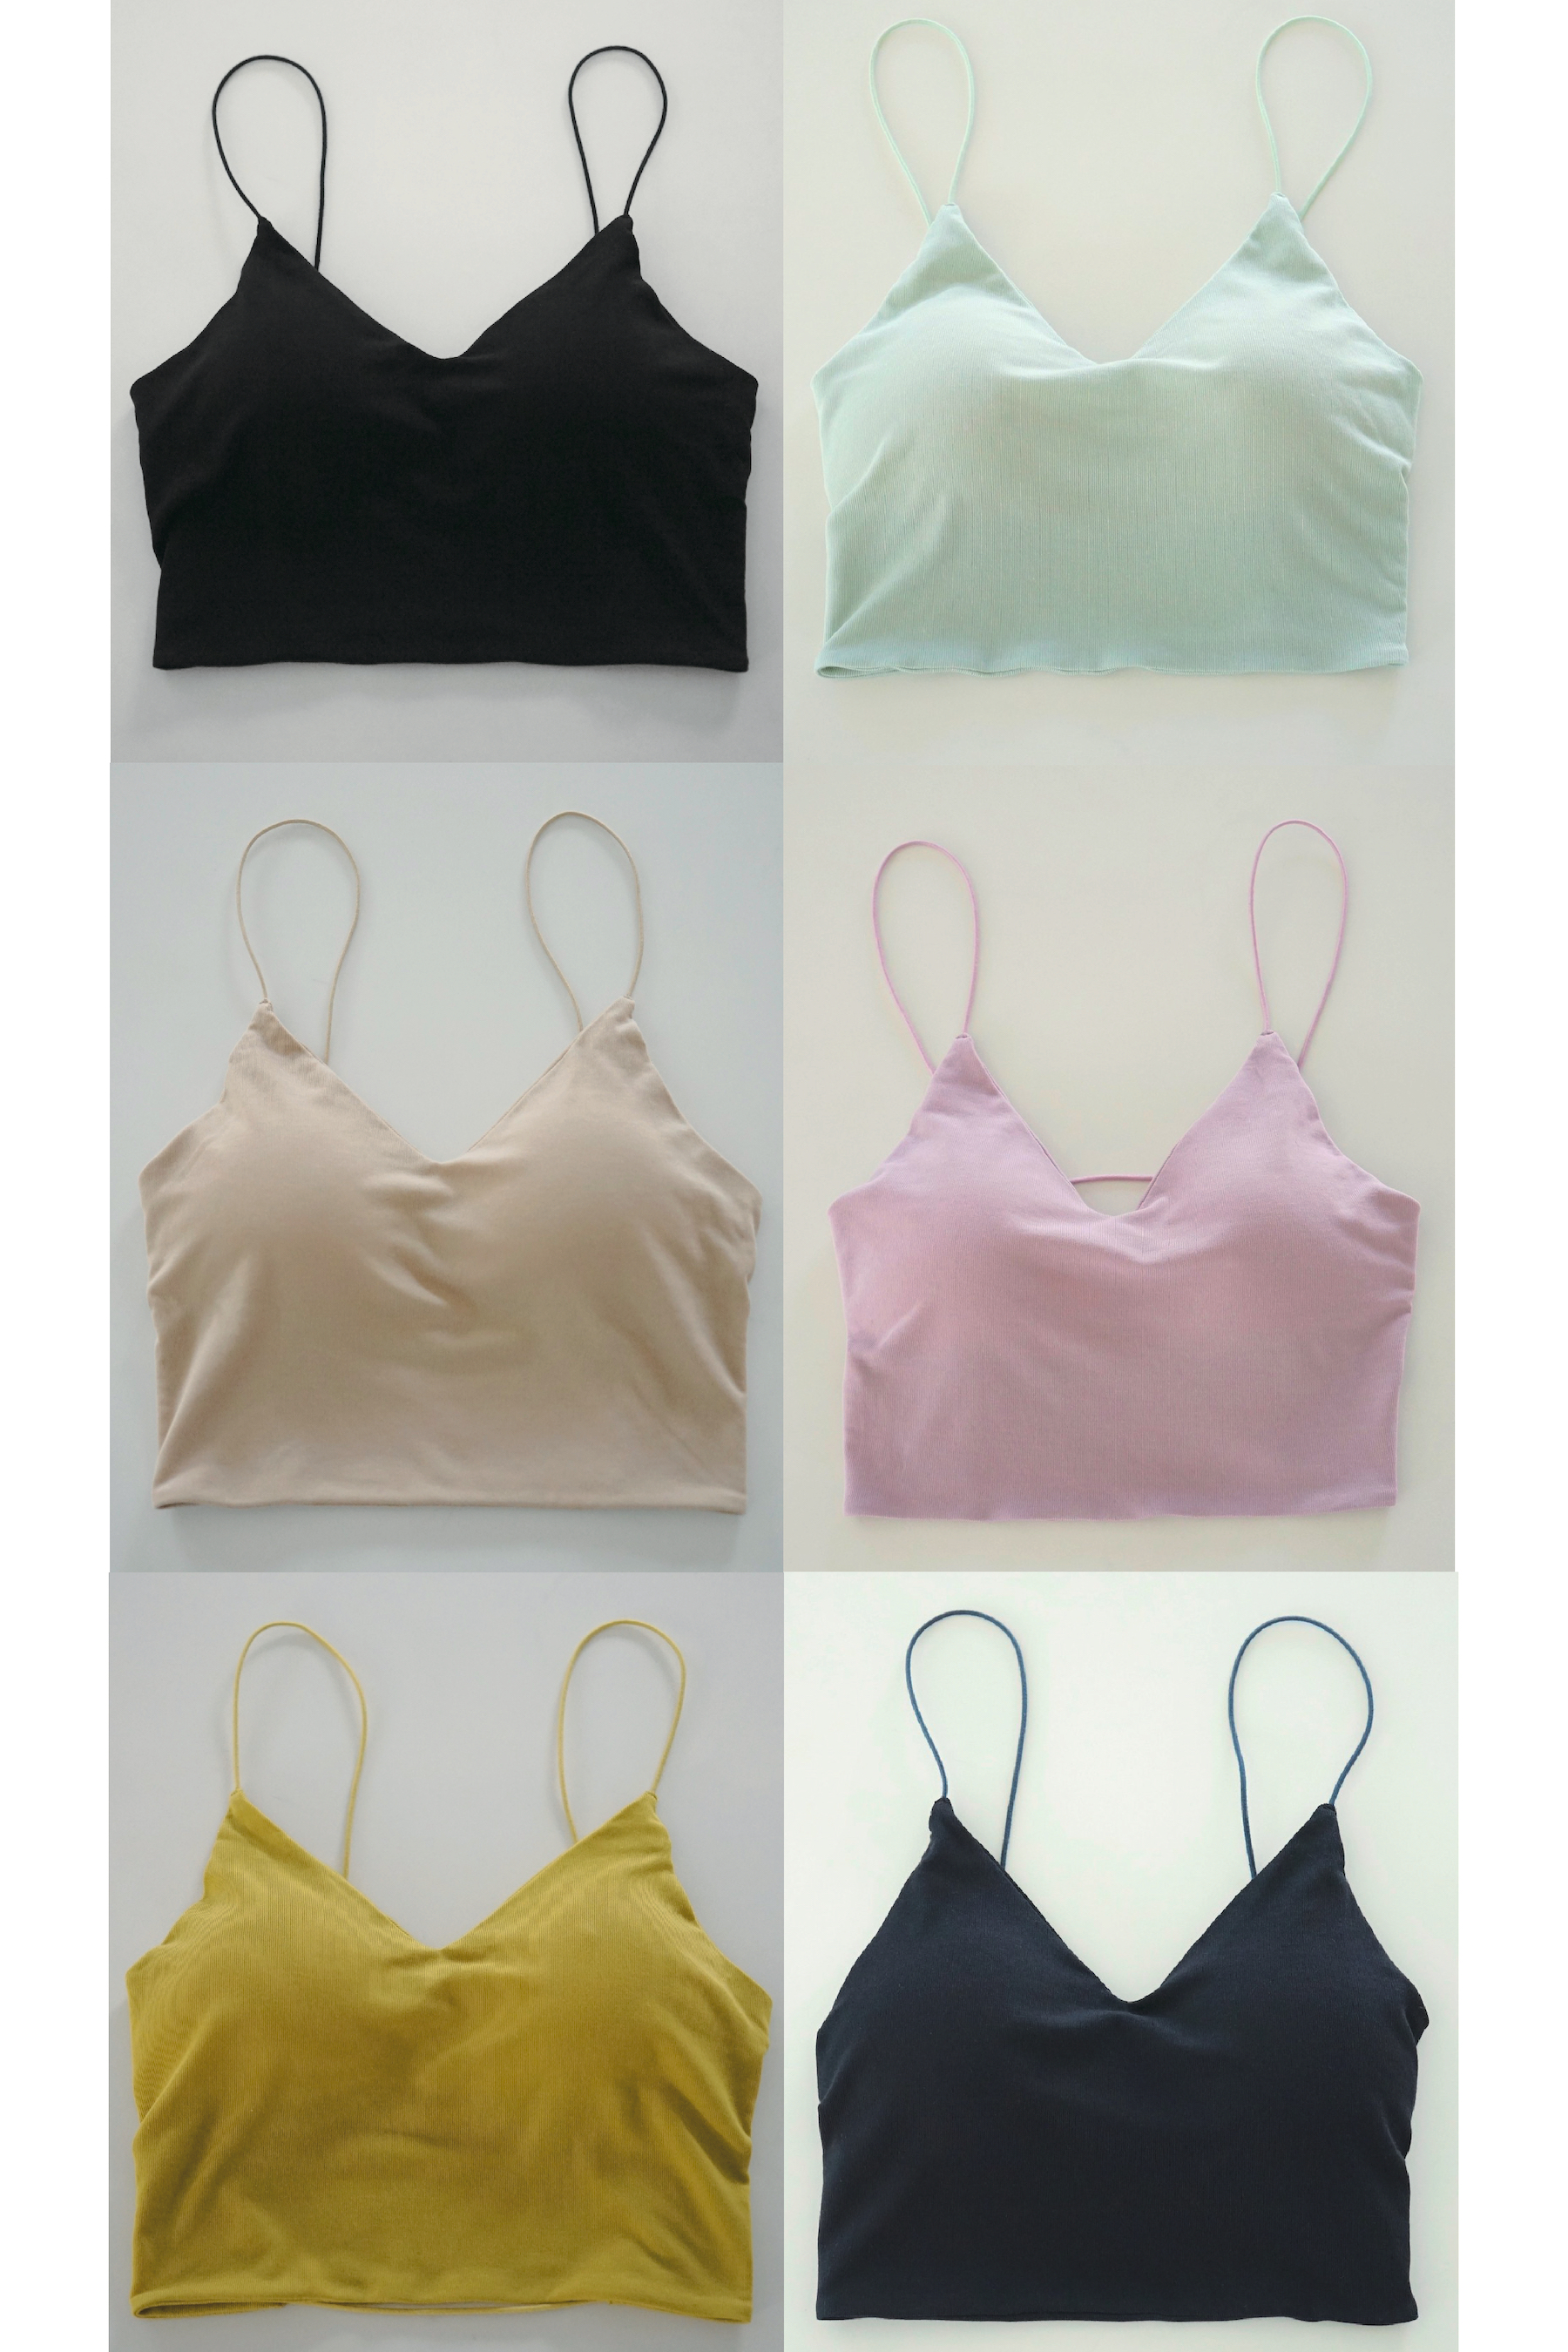 Strappy camisole in satin with side laces